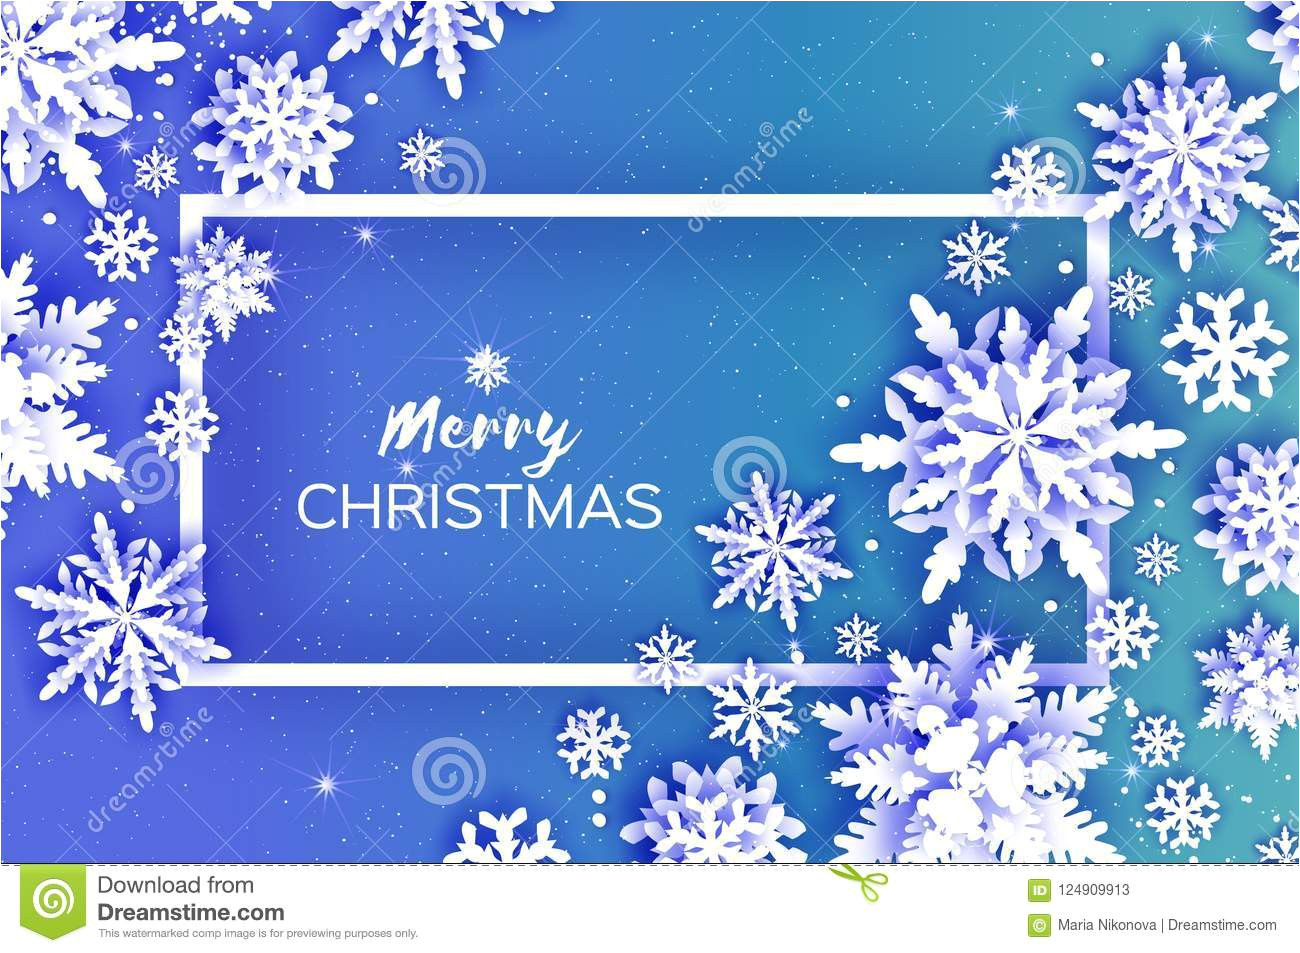 merry christmas happy new year greetings card white paper cut snowflakes origami winter decoration background merry christmas 124909913 jpg